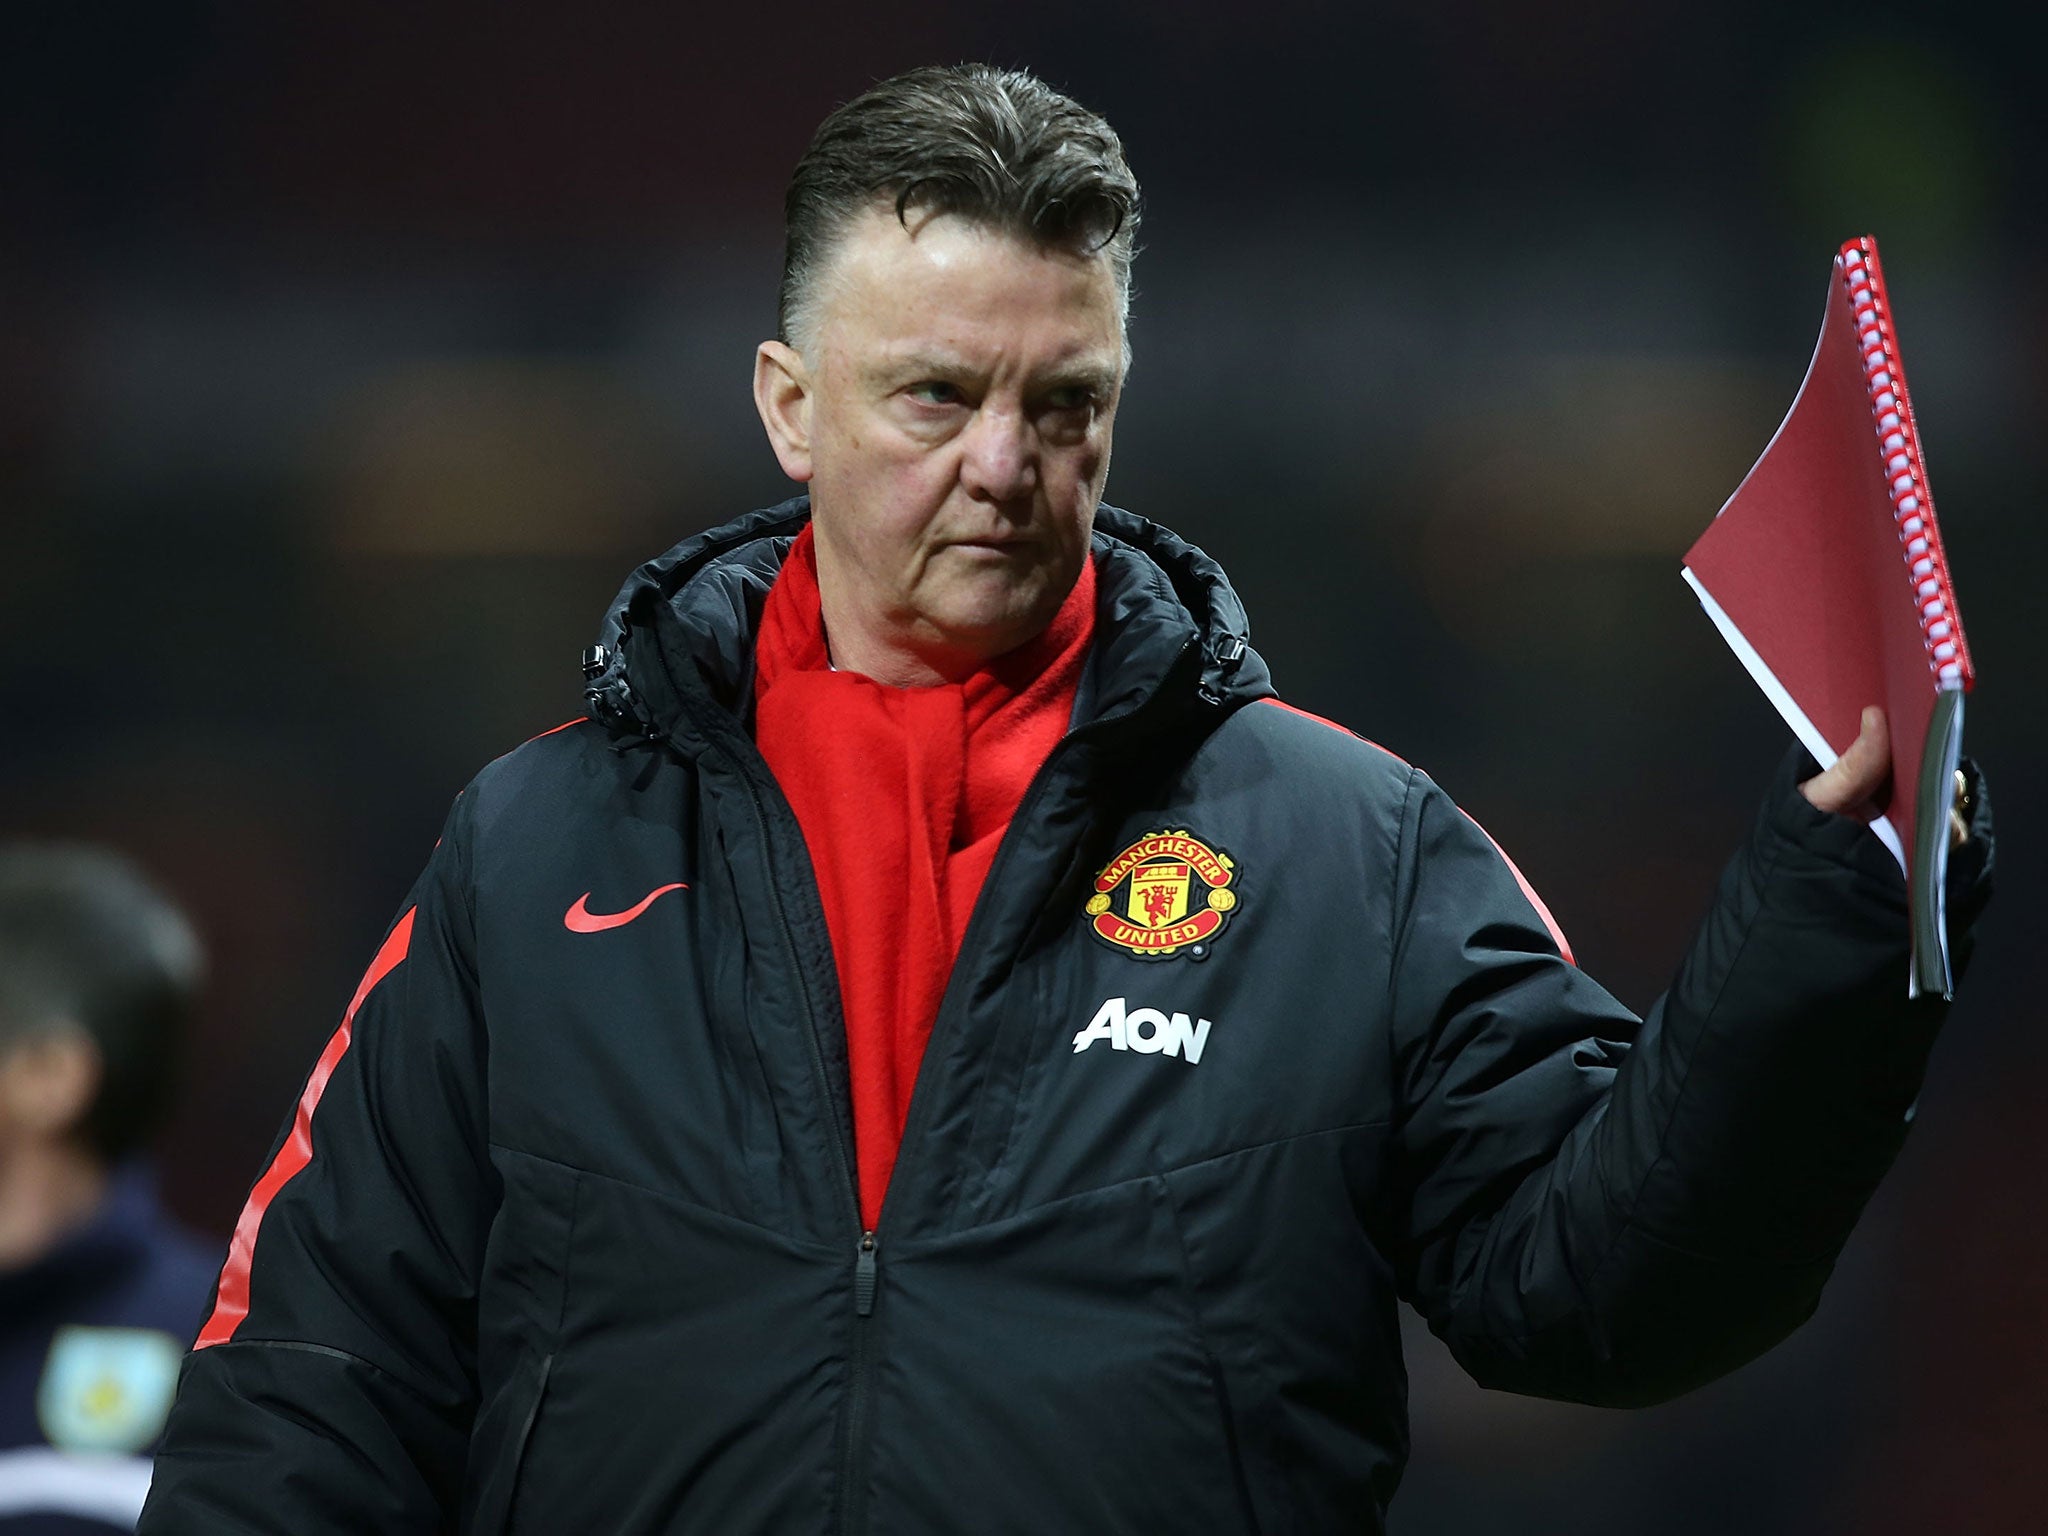 Manchester United manager Louis van Gaal leaves the field after the Burnley win